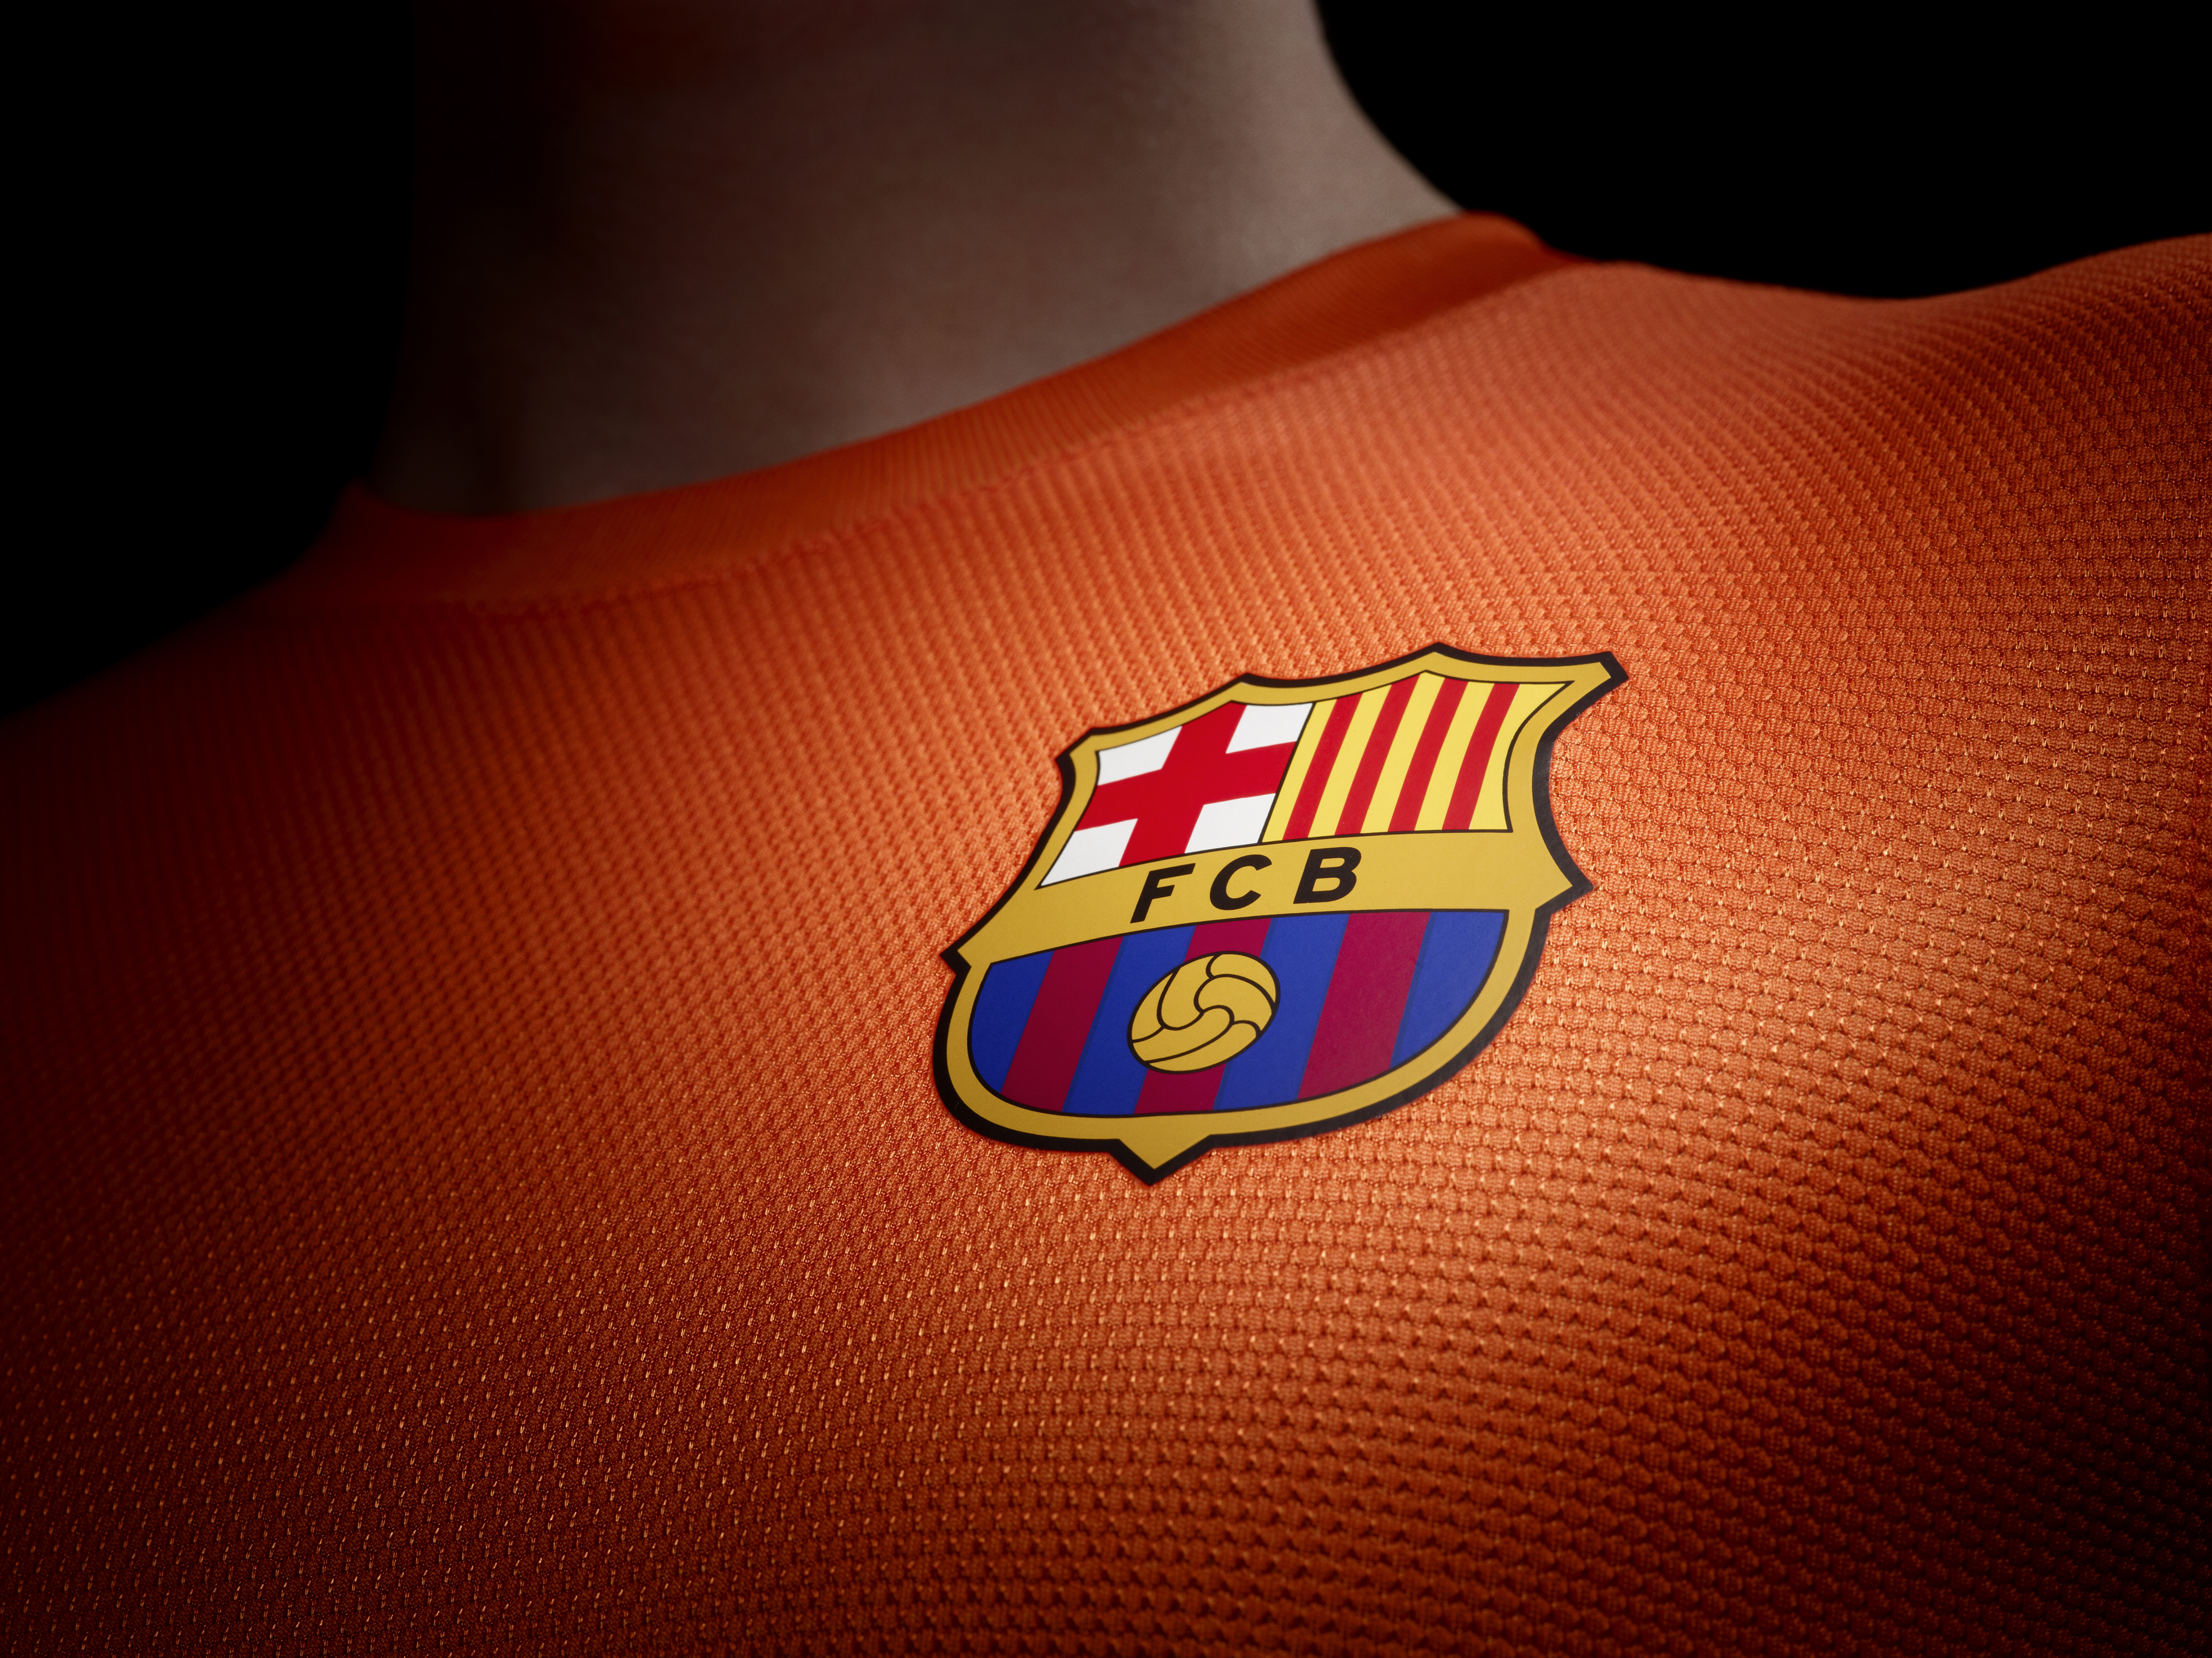 Download wallpaper Fc Barcelona, New Kit, 2012/13, section s